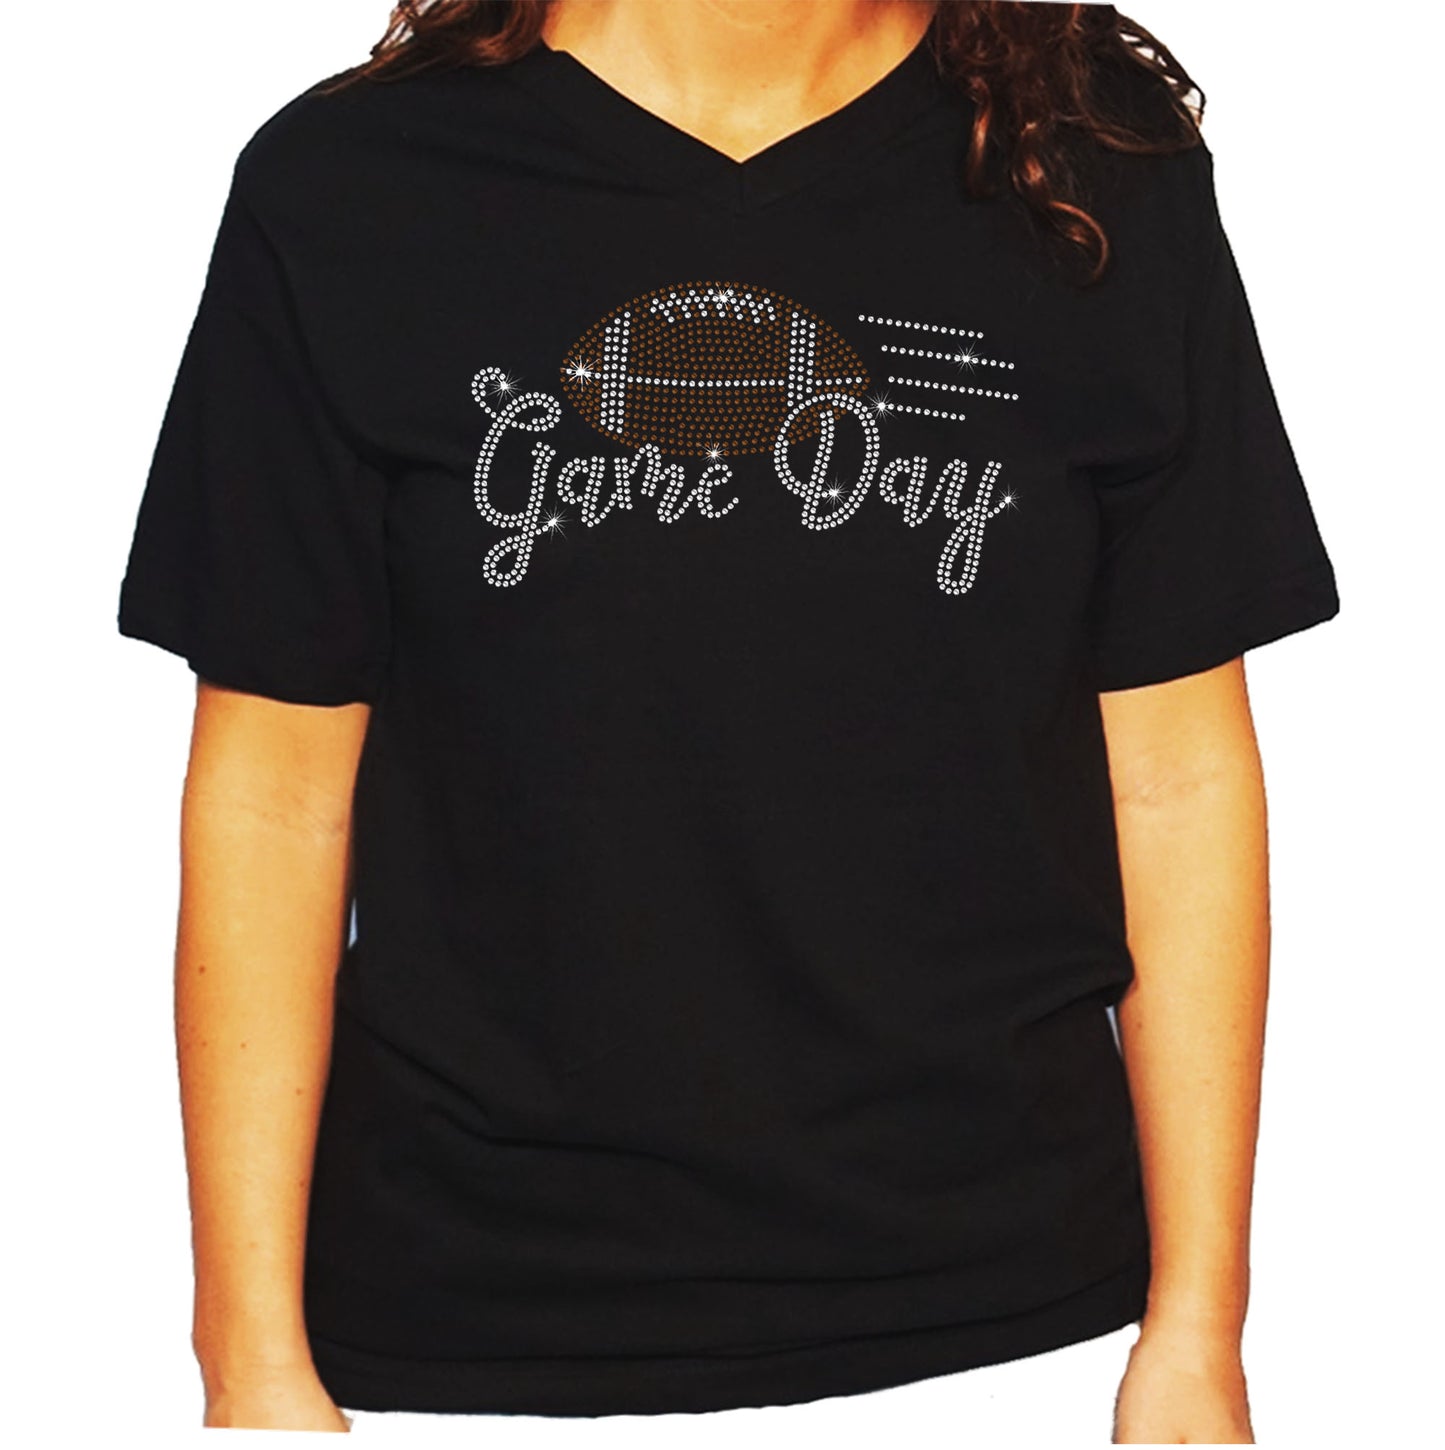 Women's / Unisex T-Shirt with Game Day Football in Rhinestones